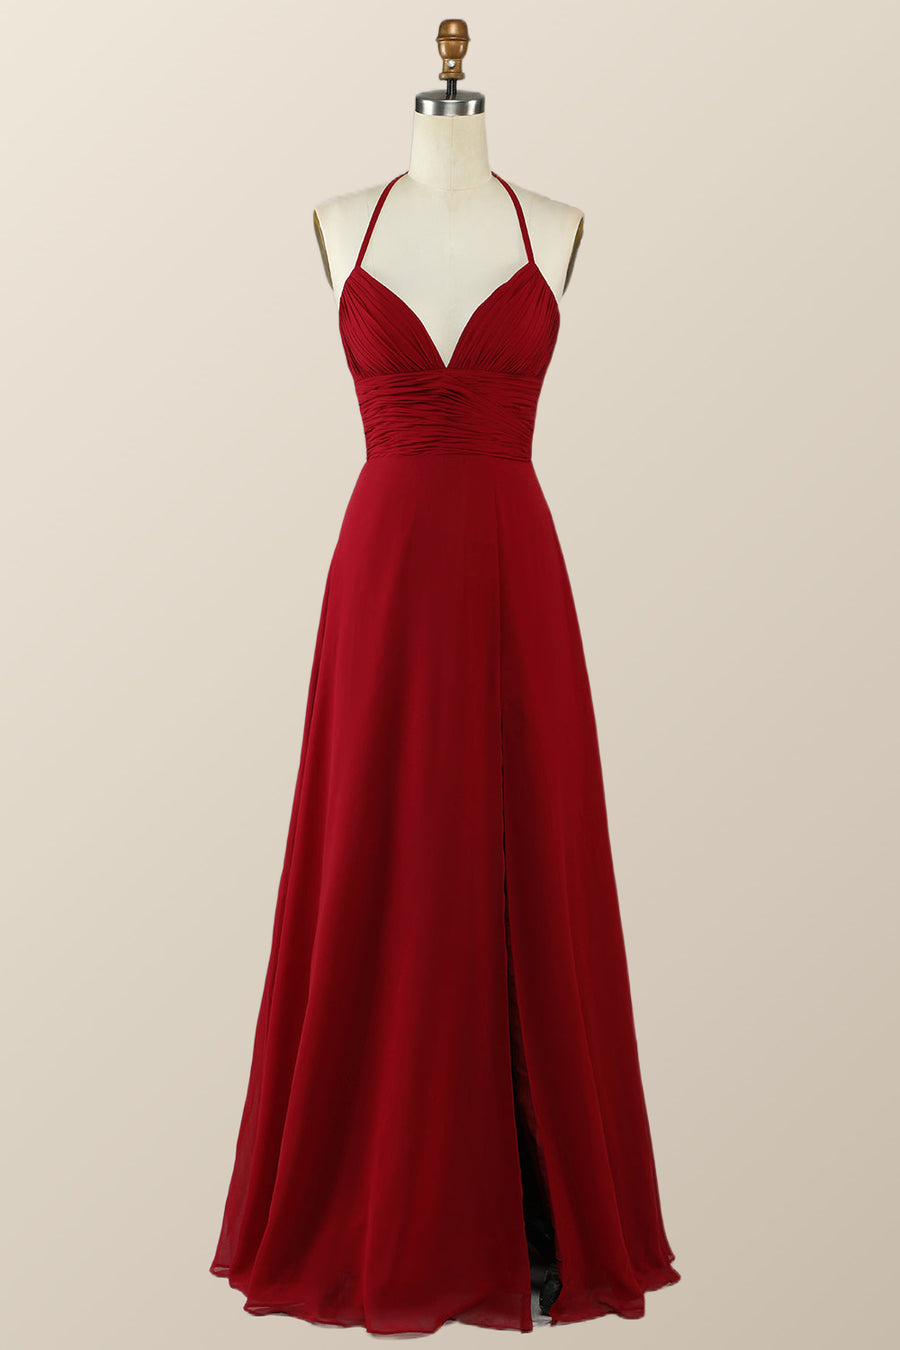 Halter Red Pleared Long Bridesmaid Dress with Slit